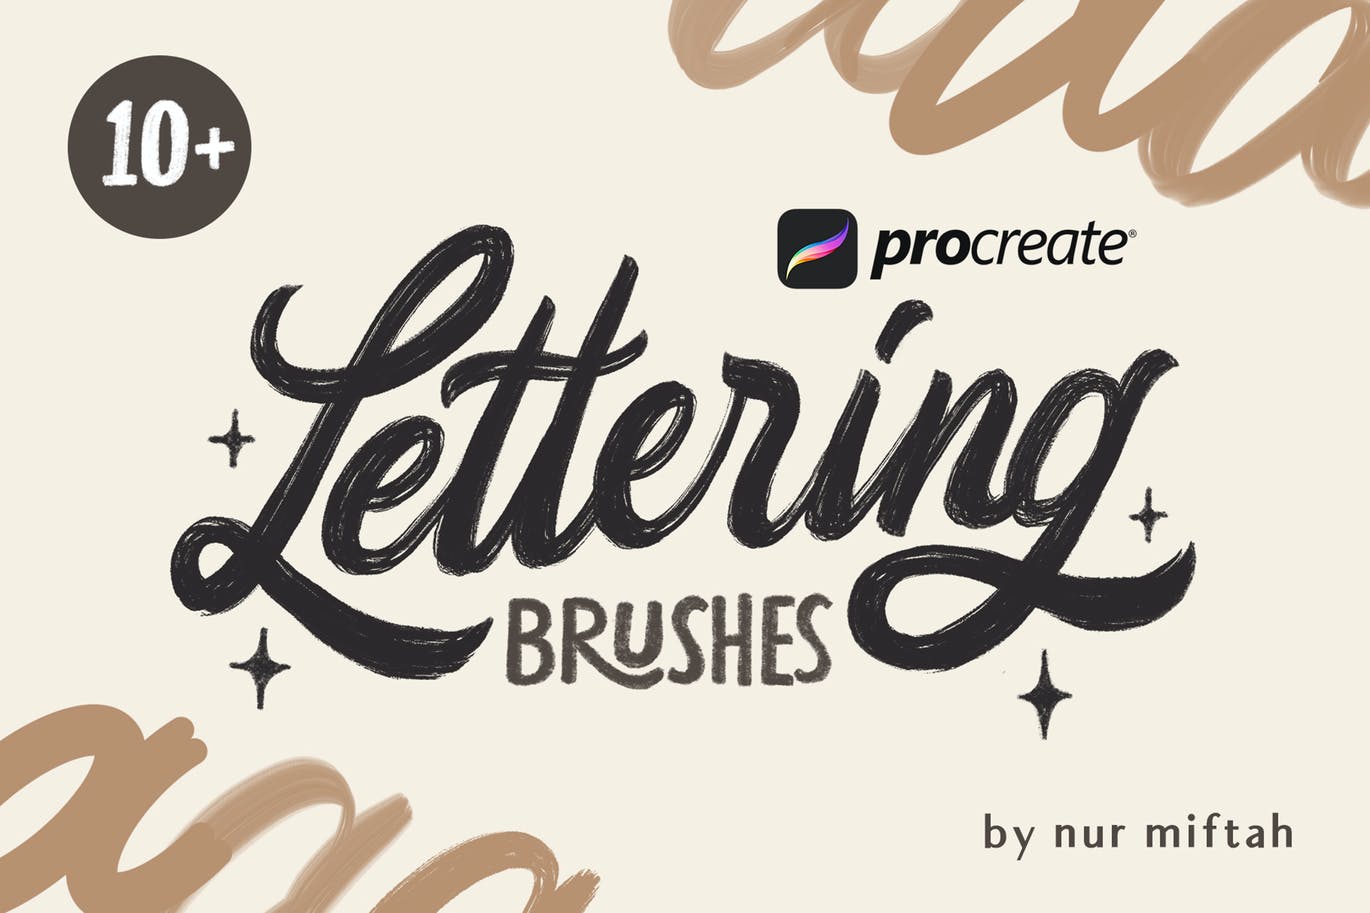 A set of lettering brushes for procreate